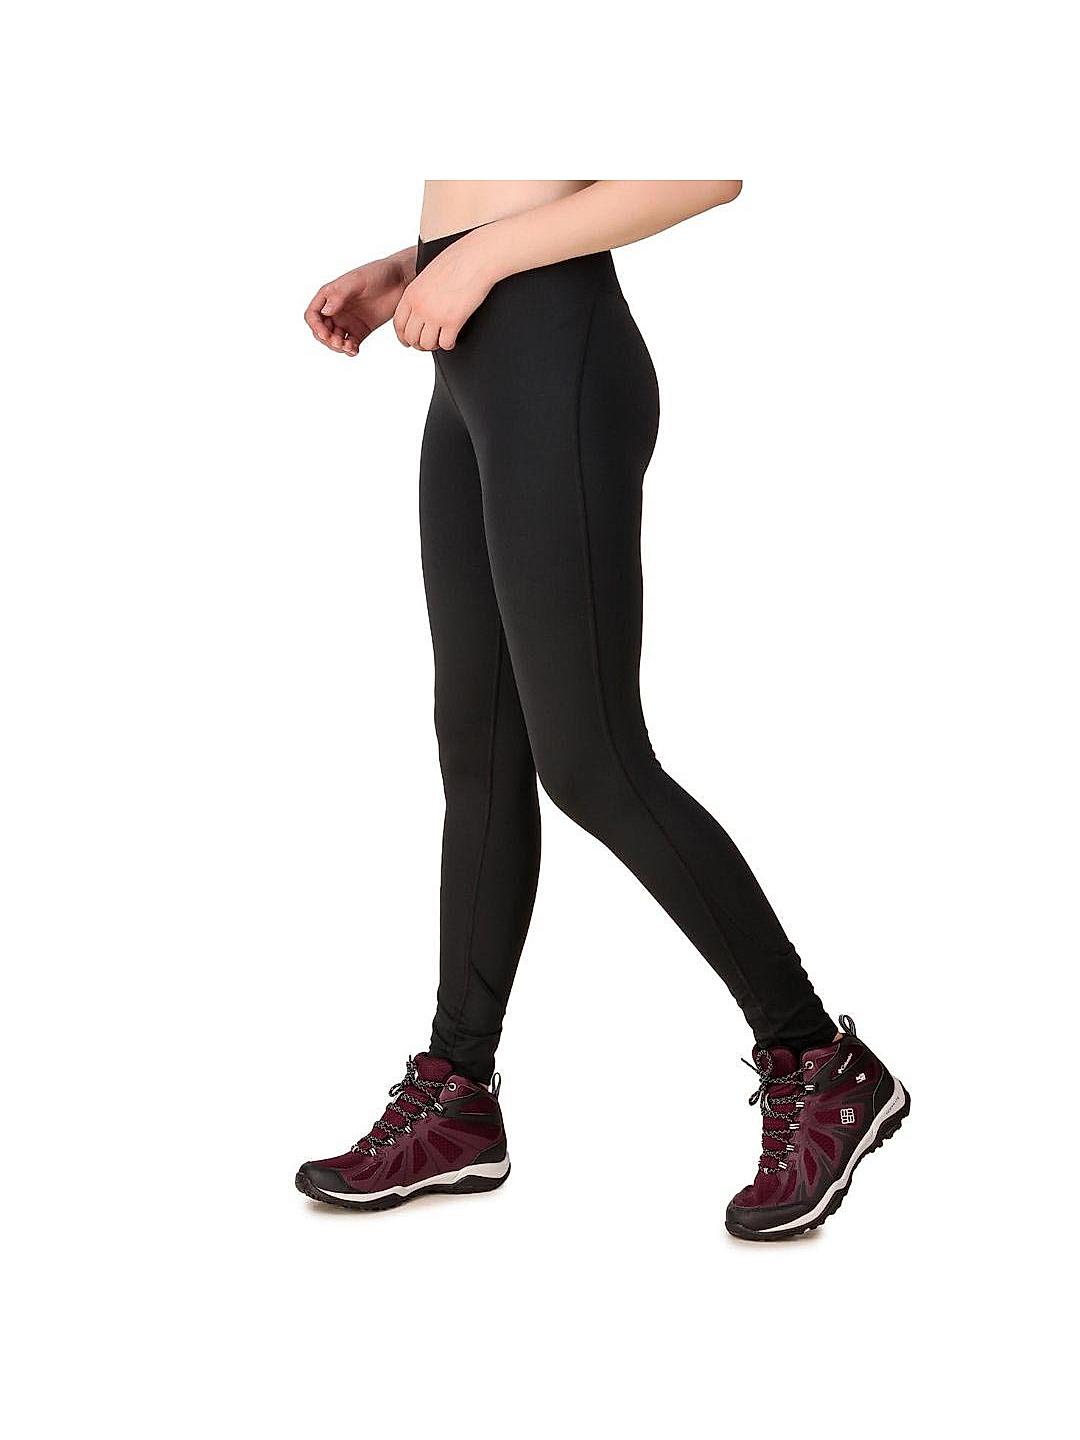 Buy Black Midweight Stretch Tight for Women Online at Columbia